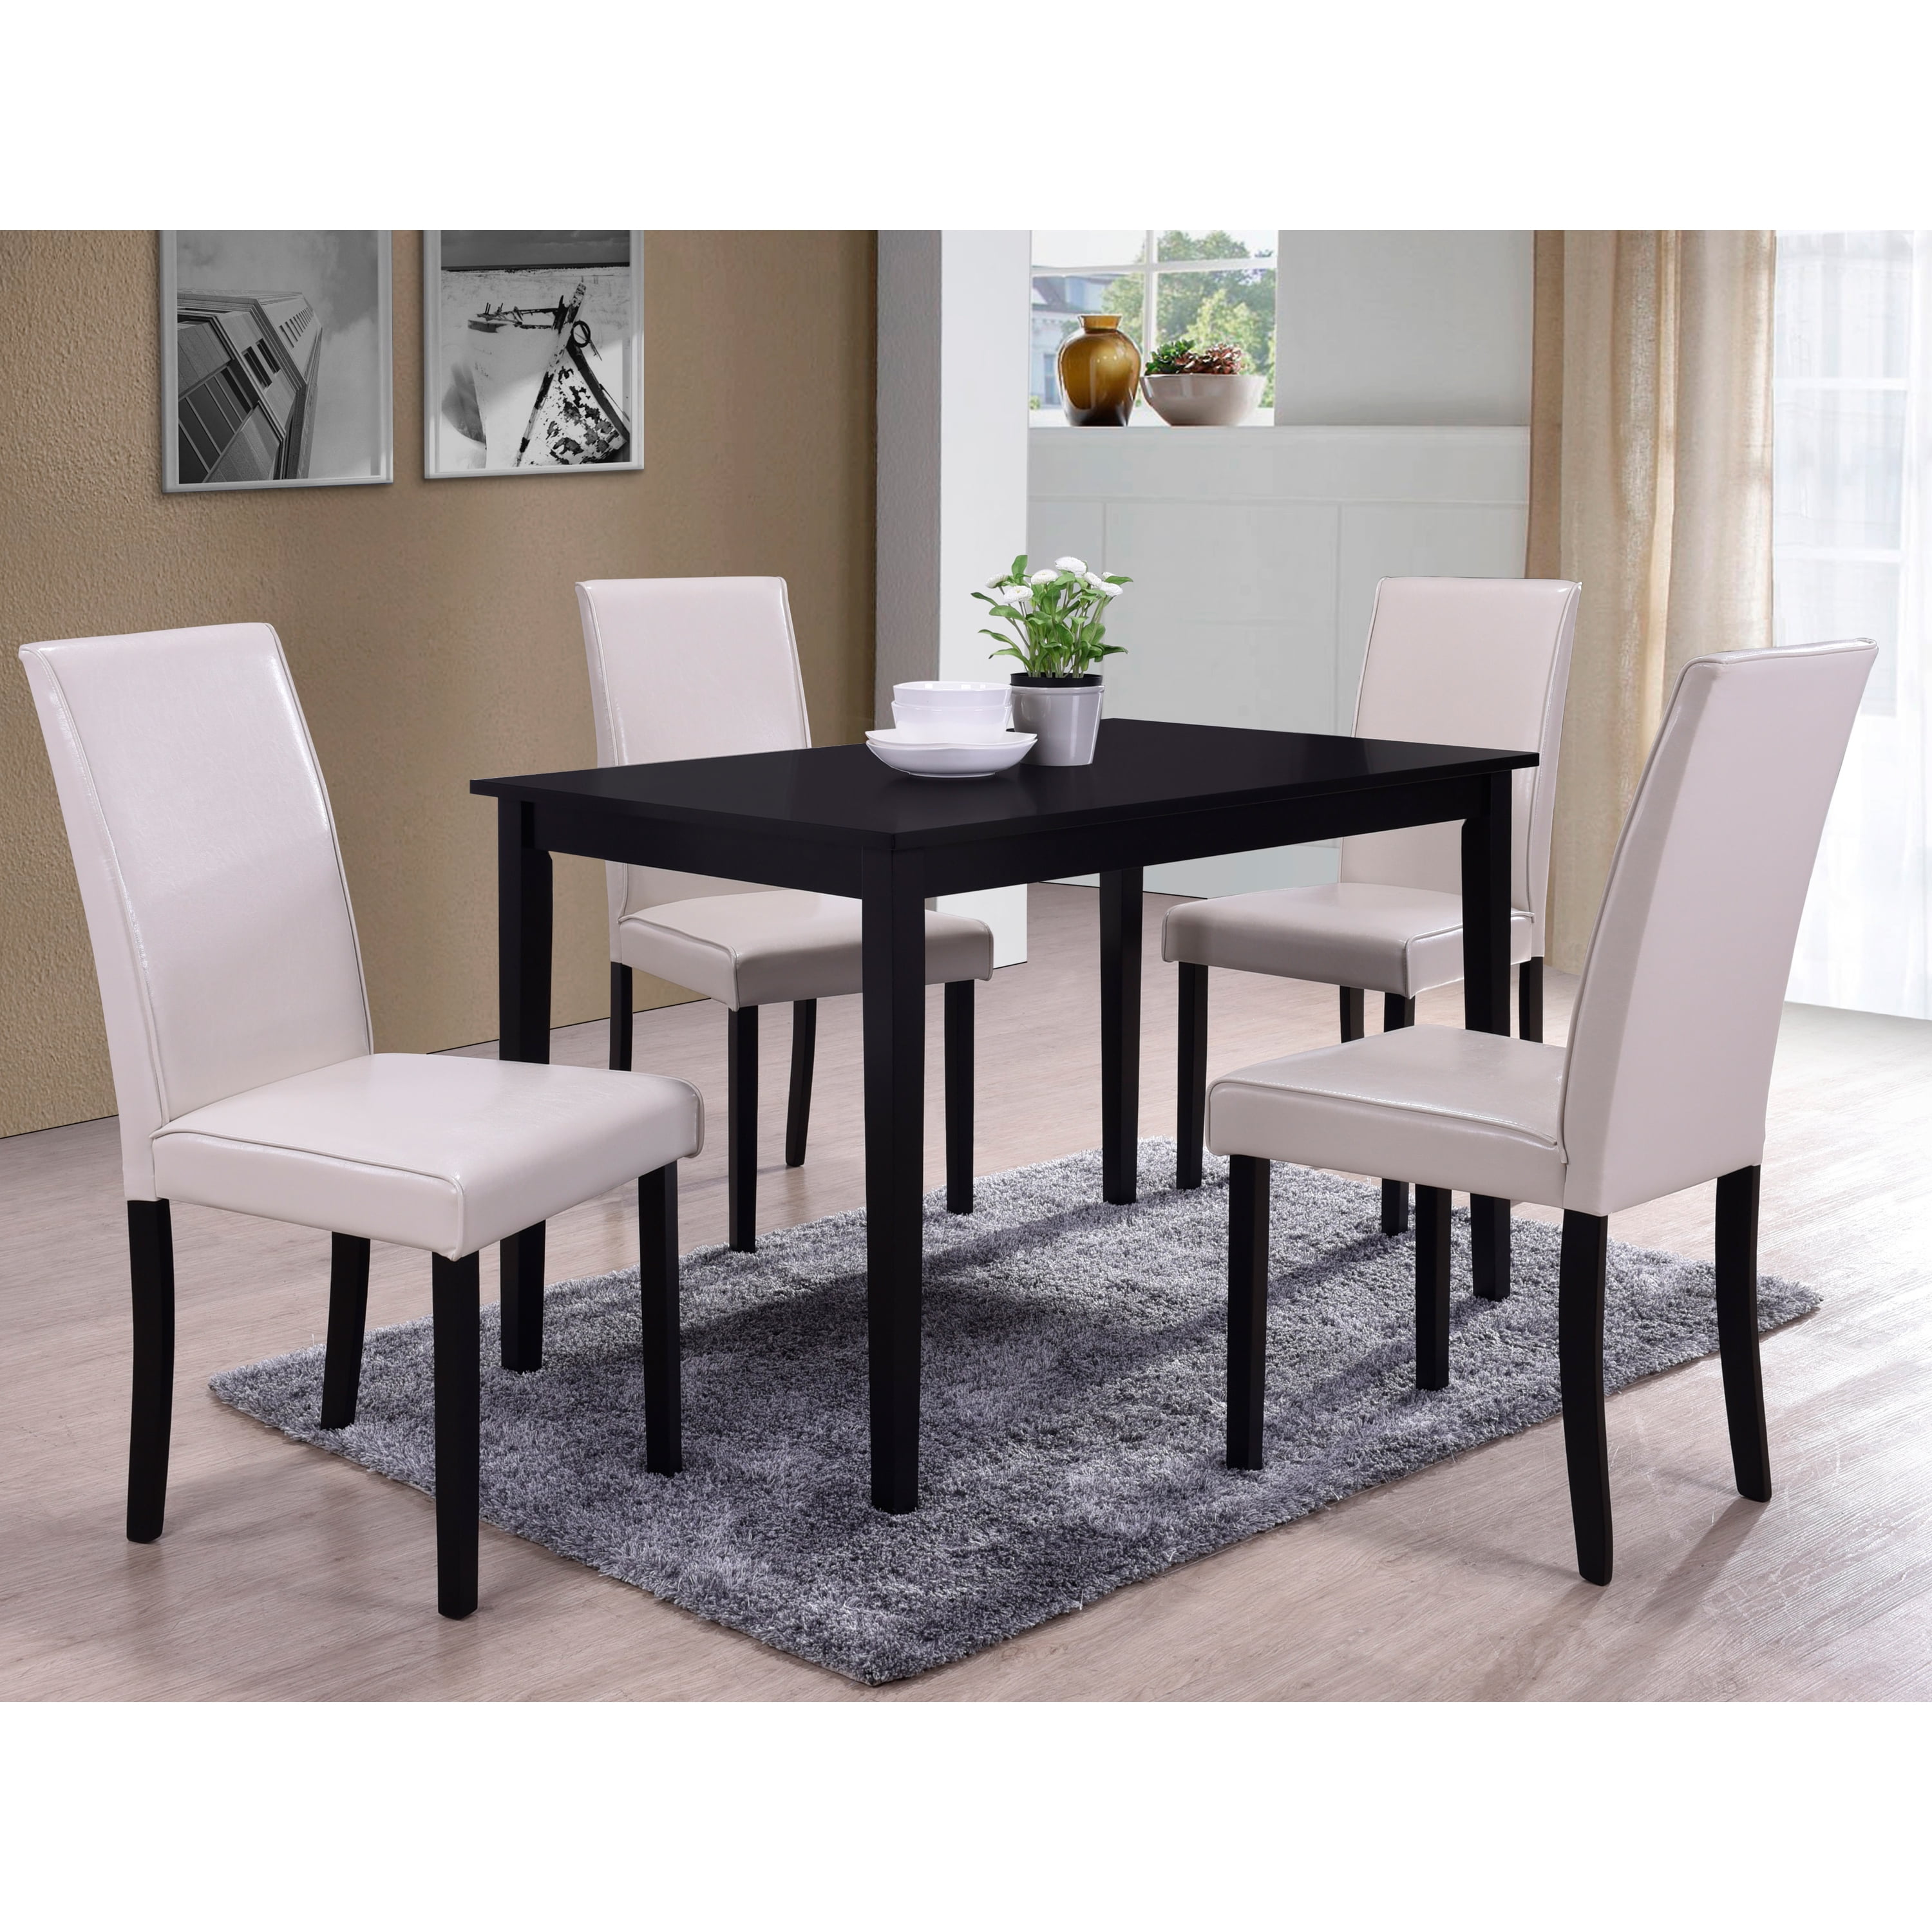 Coviar Dining Room Counter Table Set Of, Coviar Dining Room Table And Chairs With Bench Set Of 6 Brown